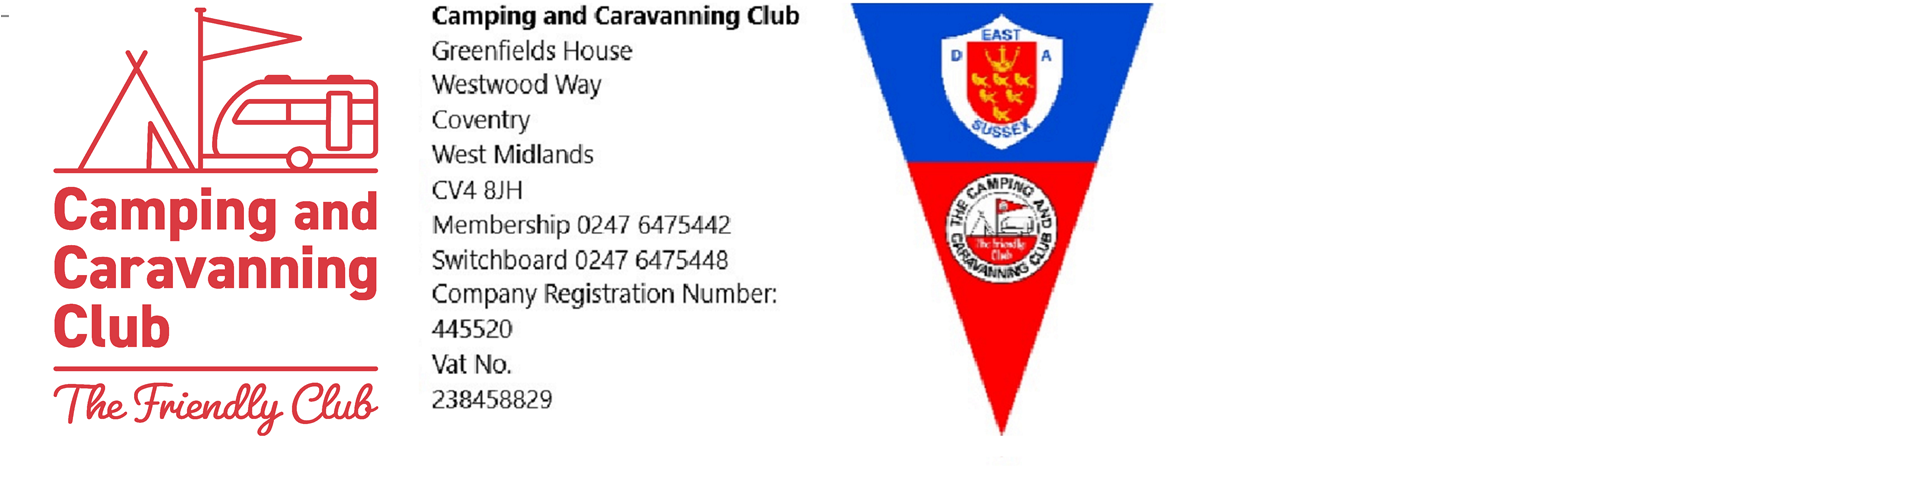 East Sussex DA of the camping and caravanning club Committee